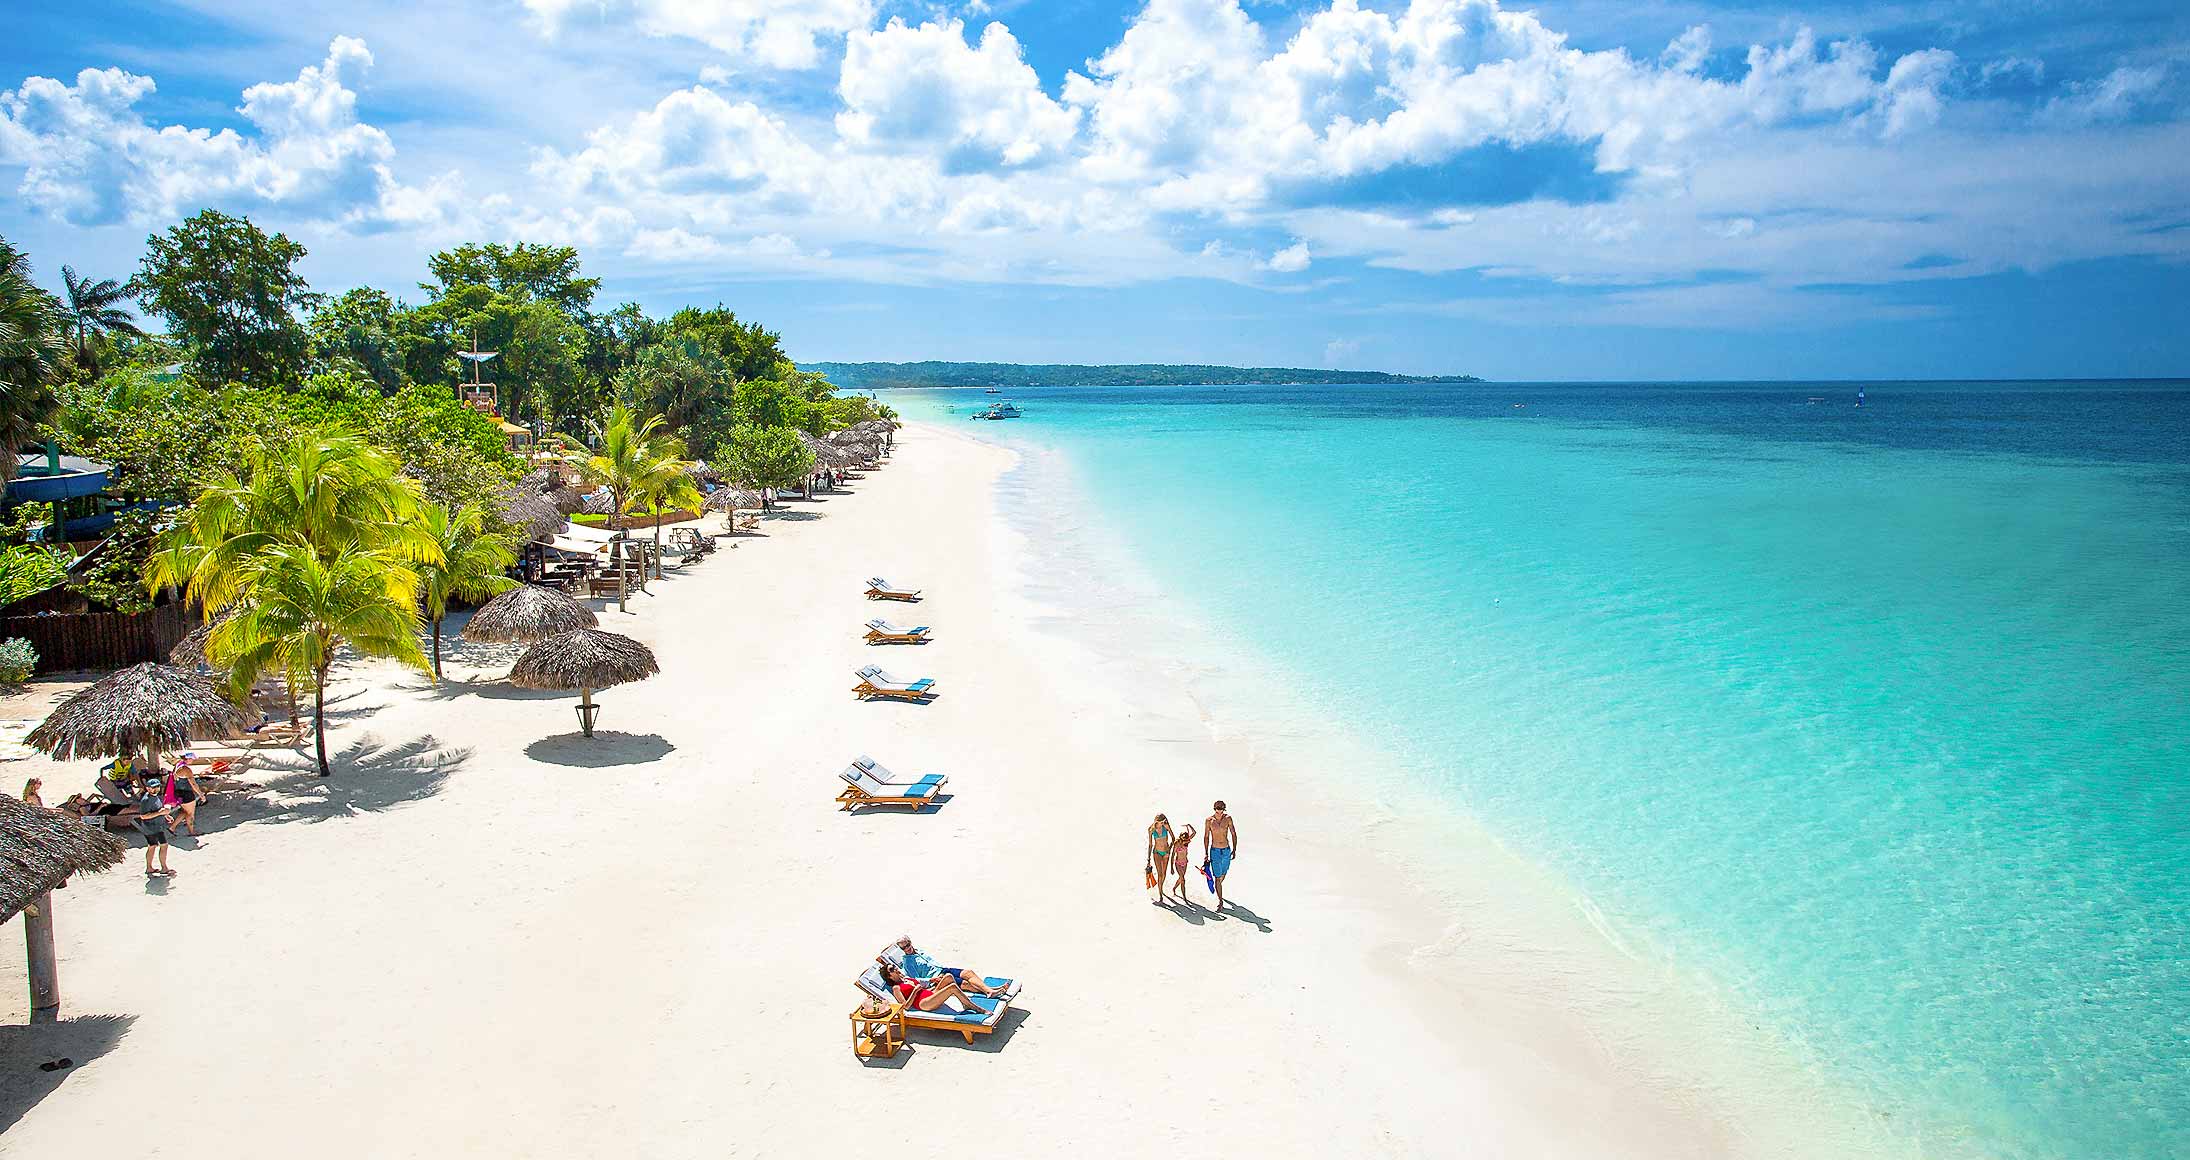 BEACHES® Negril: All-Inclusive On Mile Beach